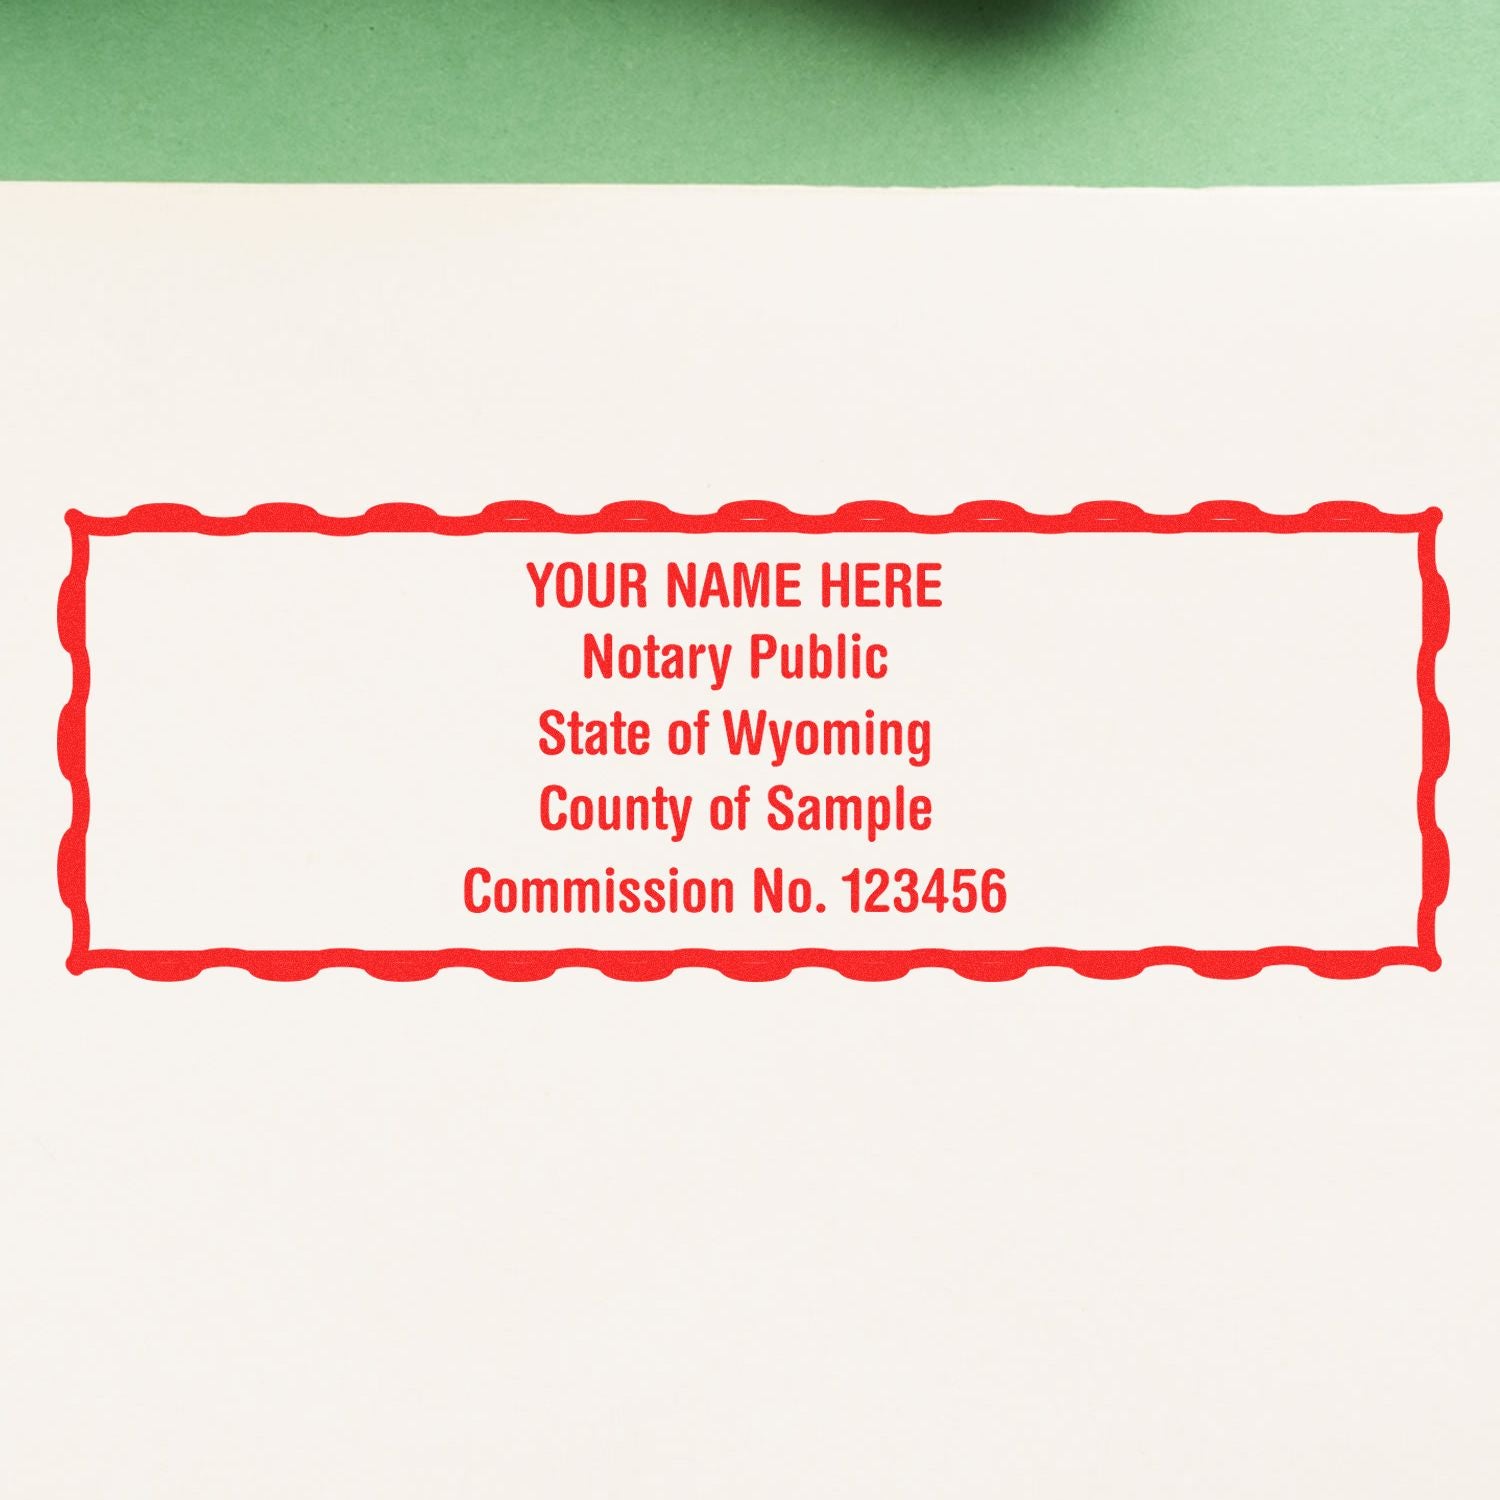 The main image for the PSI Wyoming Notary Stamp depicting a sample of the imprint and electronic files